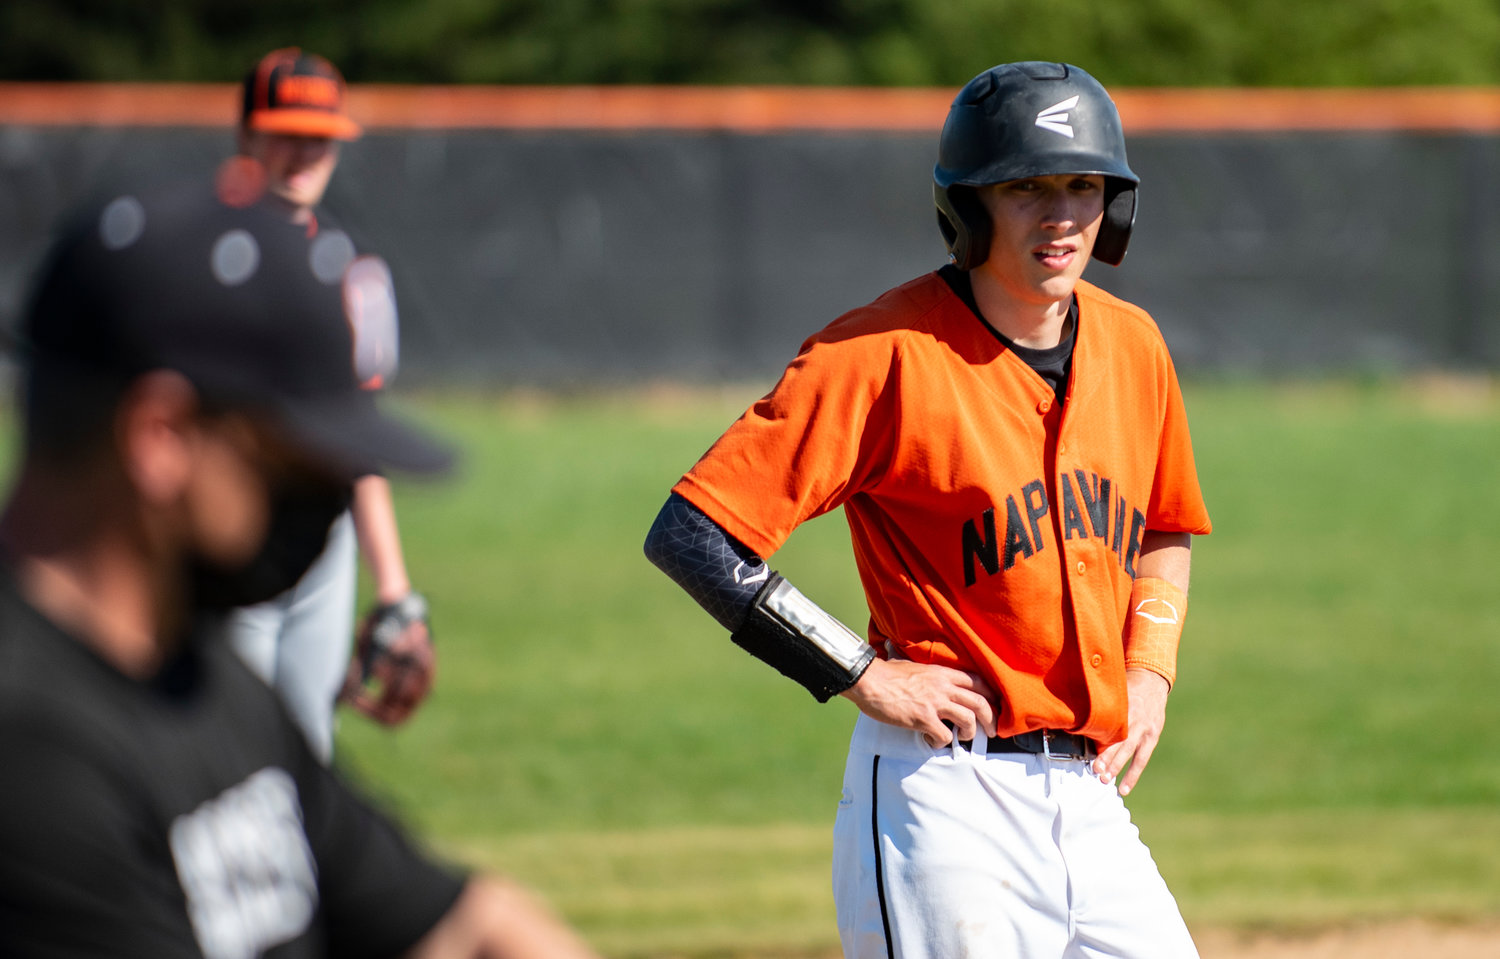 Napavine senior Laythan Demarest sits on third base moments before scoring a run for the Tigers against Kalama Tuesday.